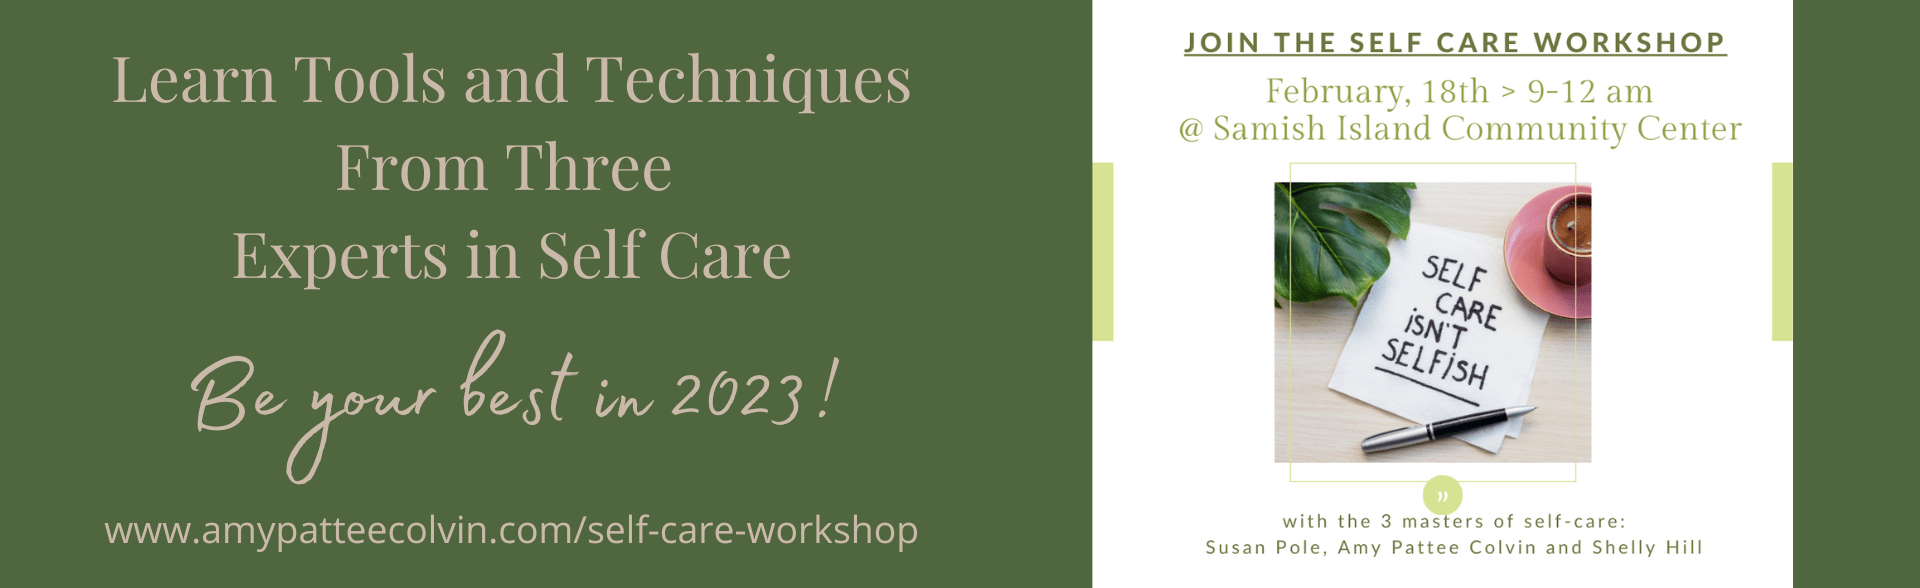 Kick start 2023 with a Self Care Workshop